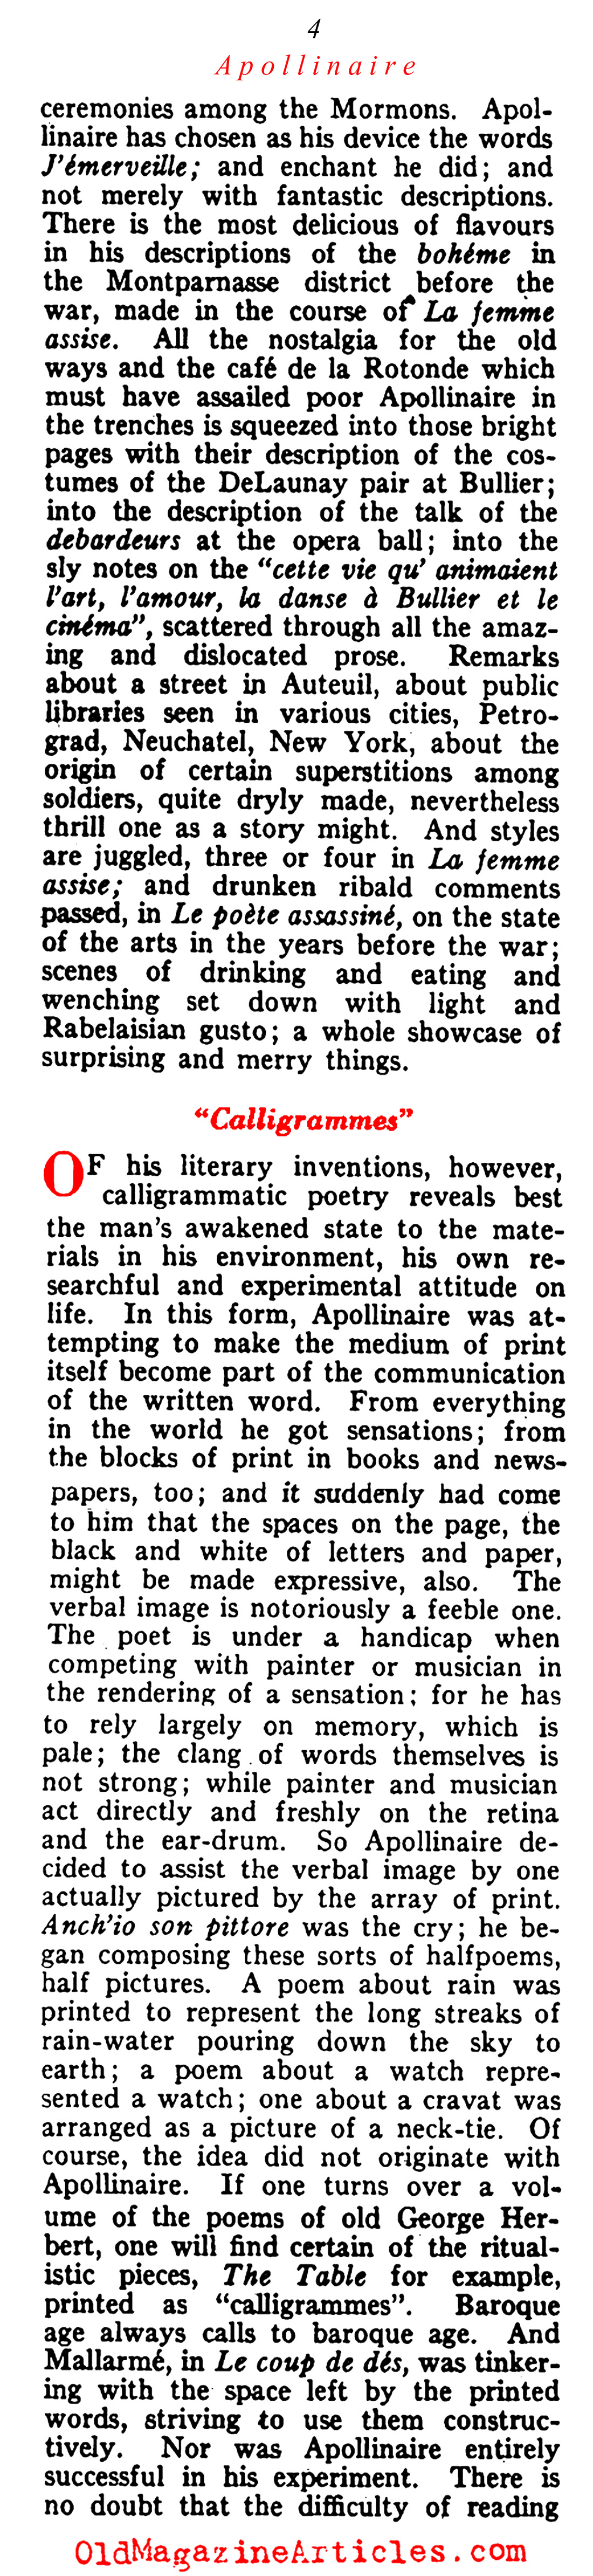 A Profile of Guillaume Apollinaire (Vanity Fair, 1922)